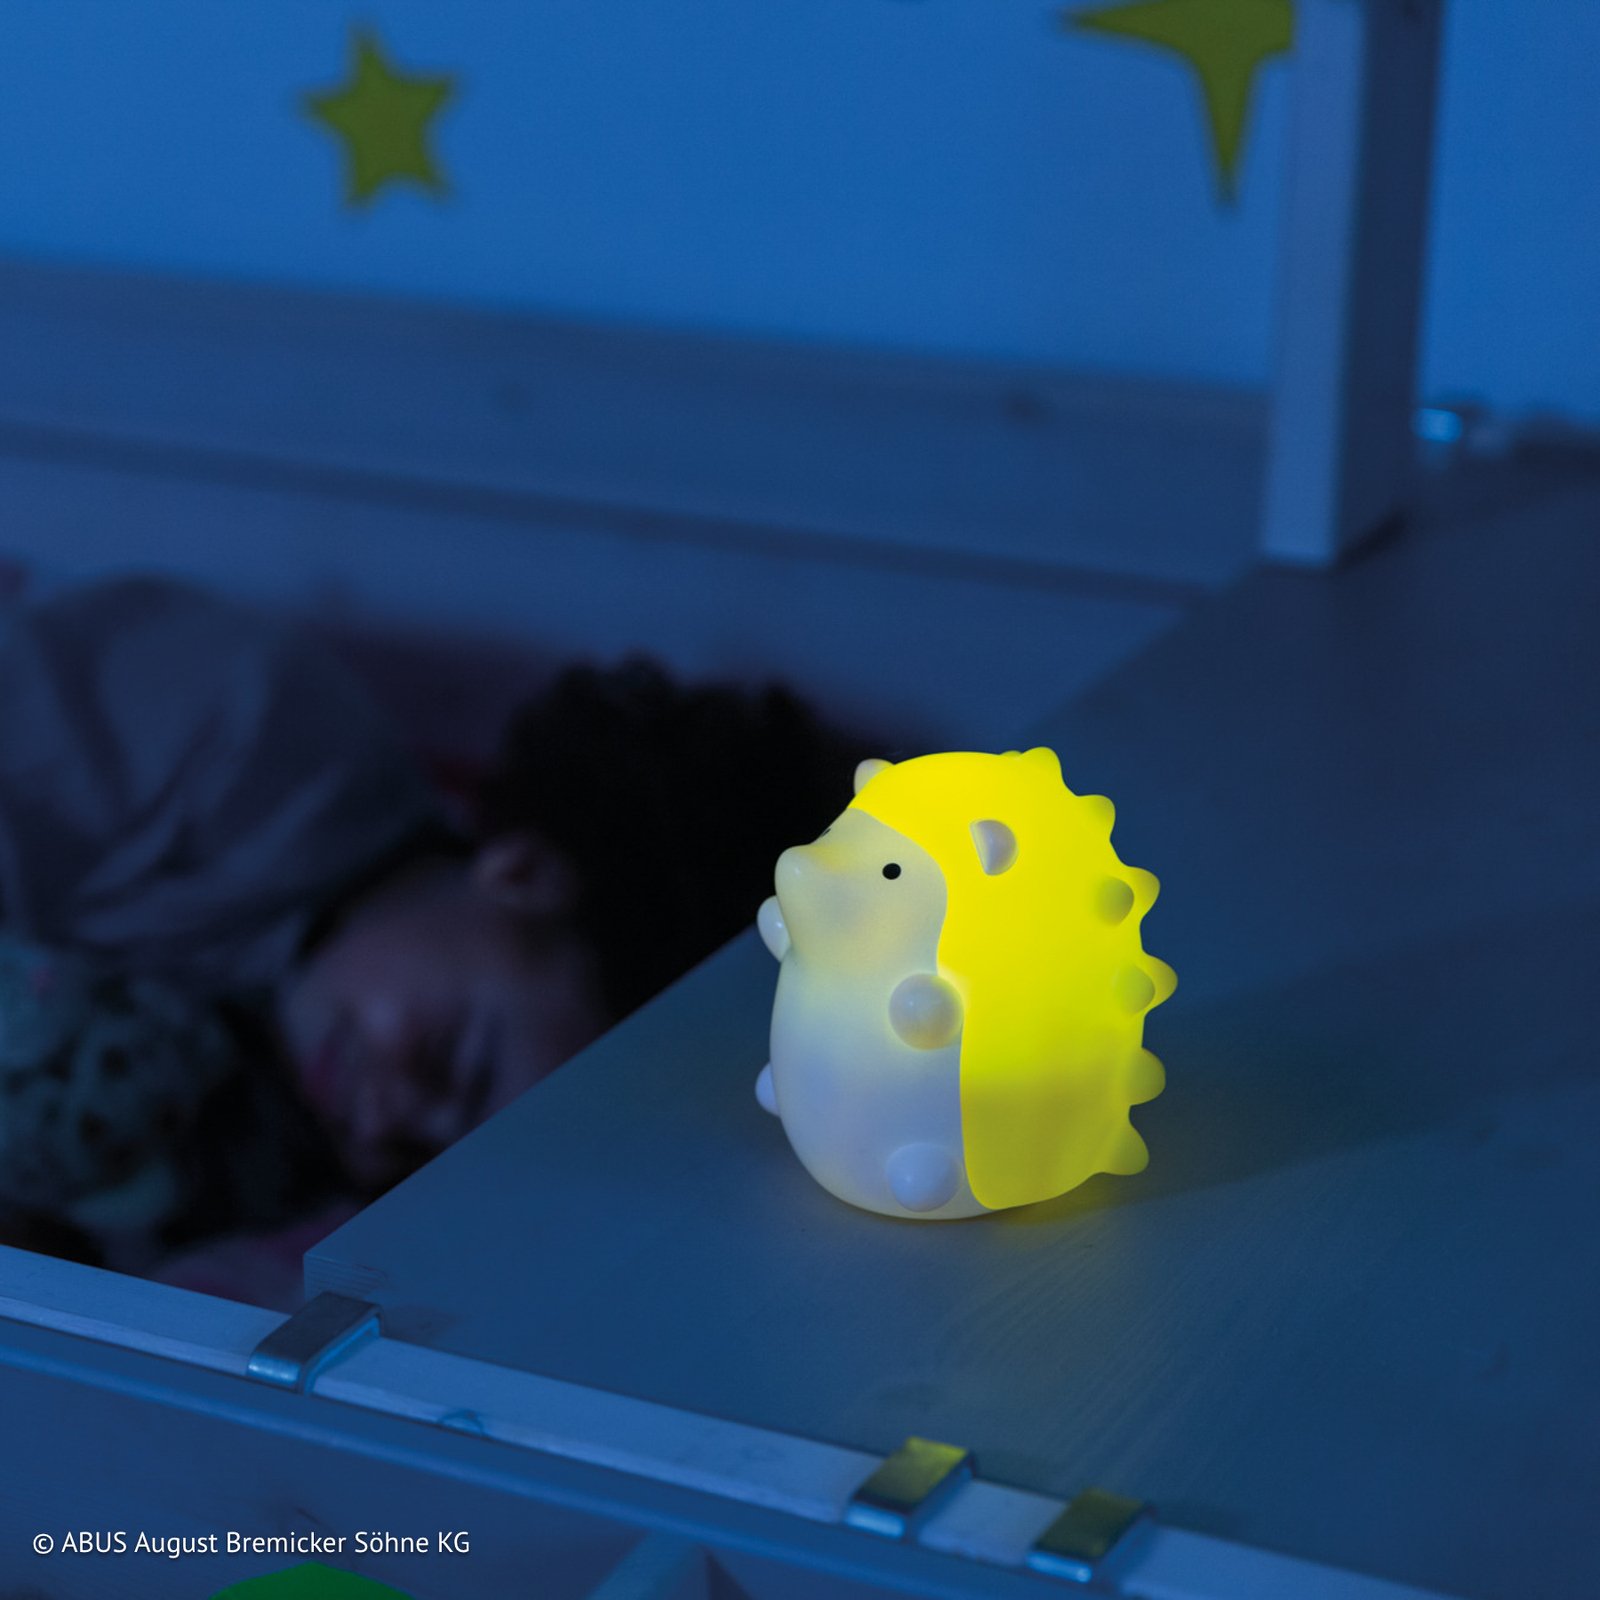 ABUS Lucy LED night light in hedgehog form